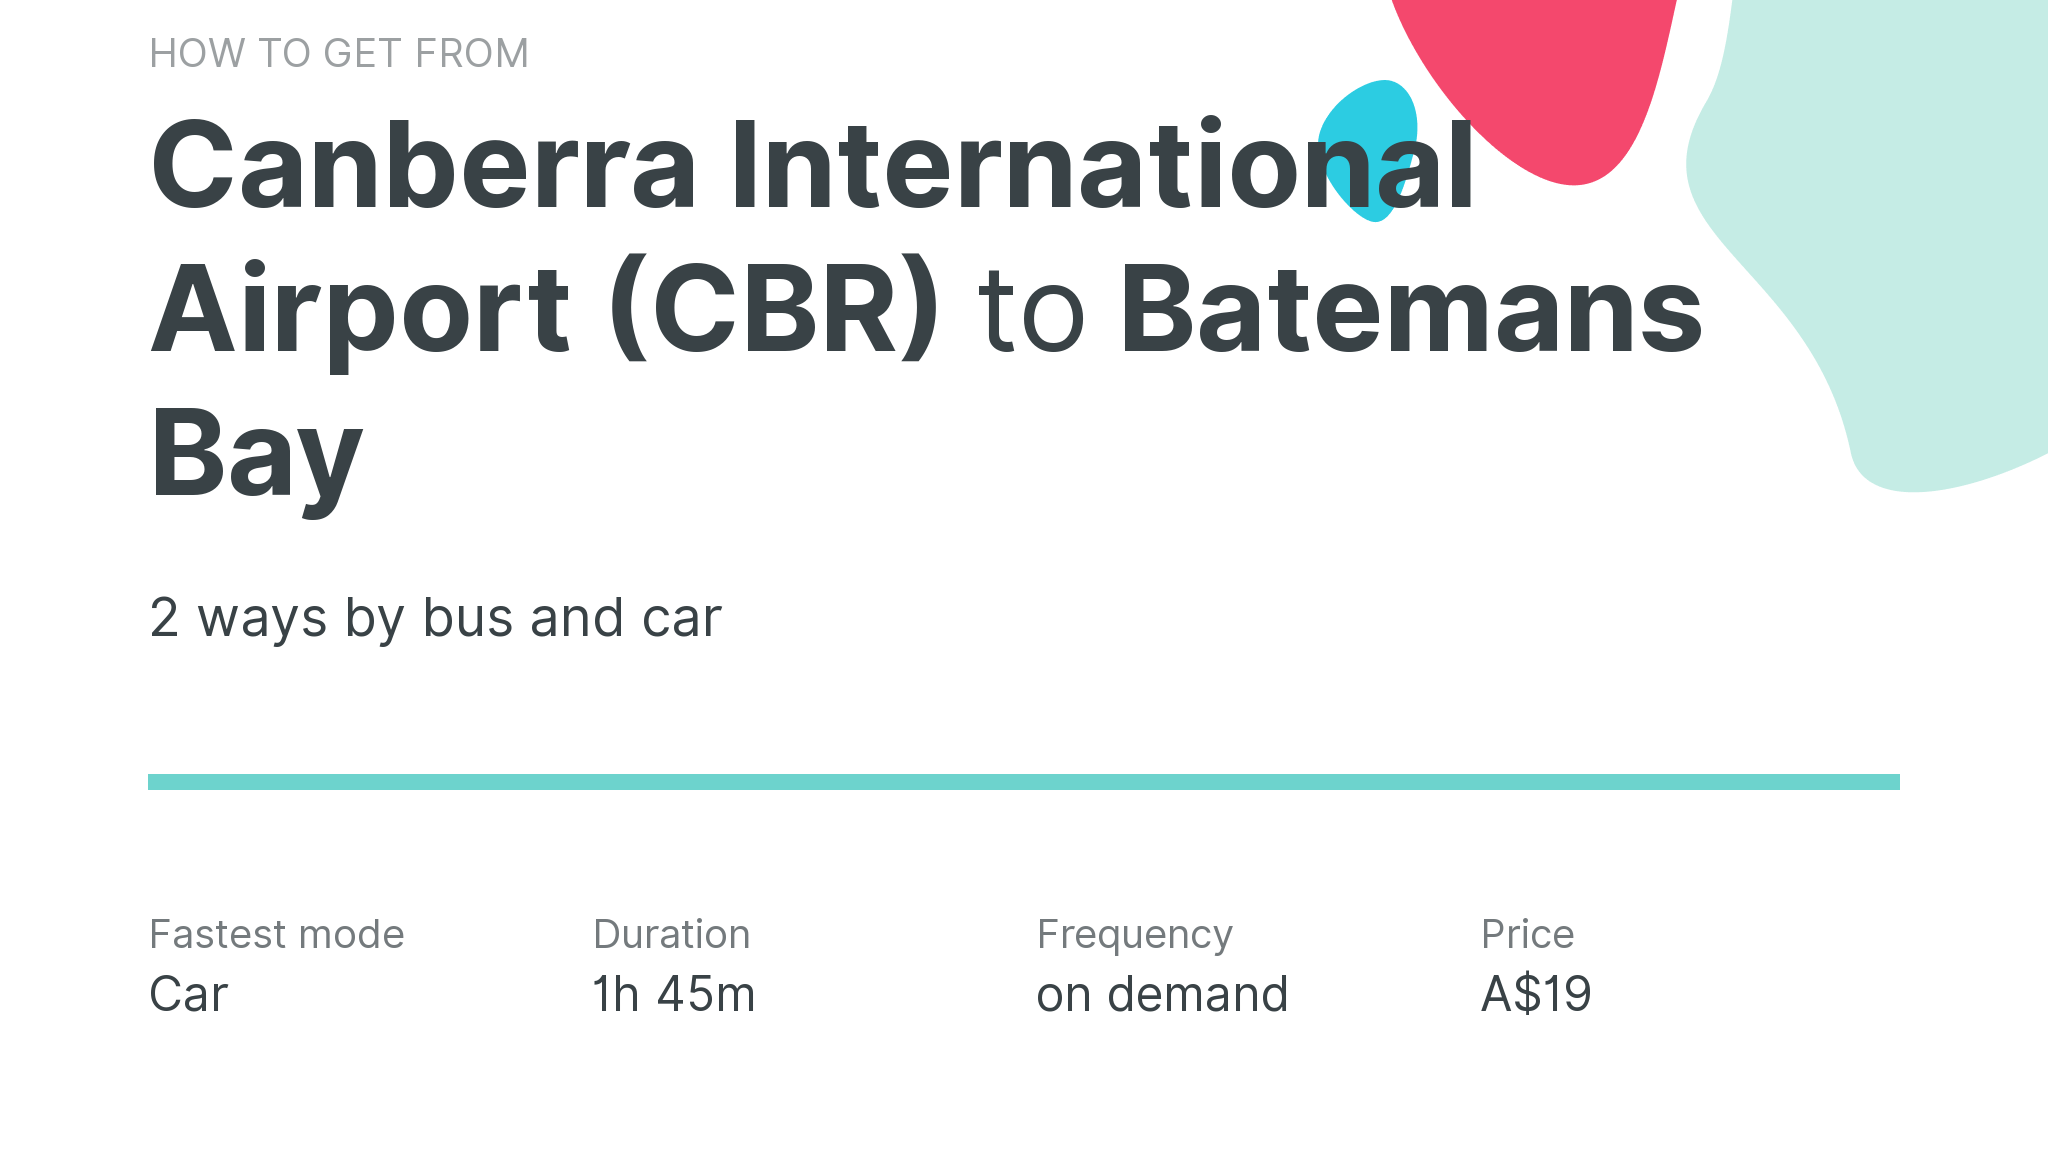 How do I get from Canberra International Airport (CBR) to Batemans Bay